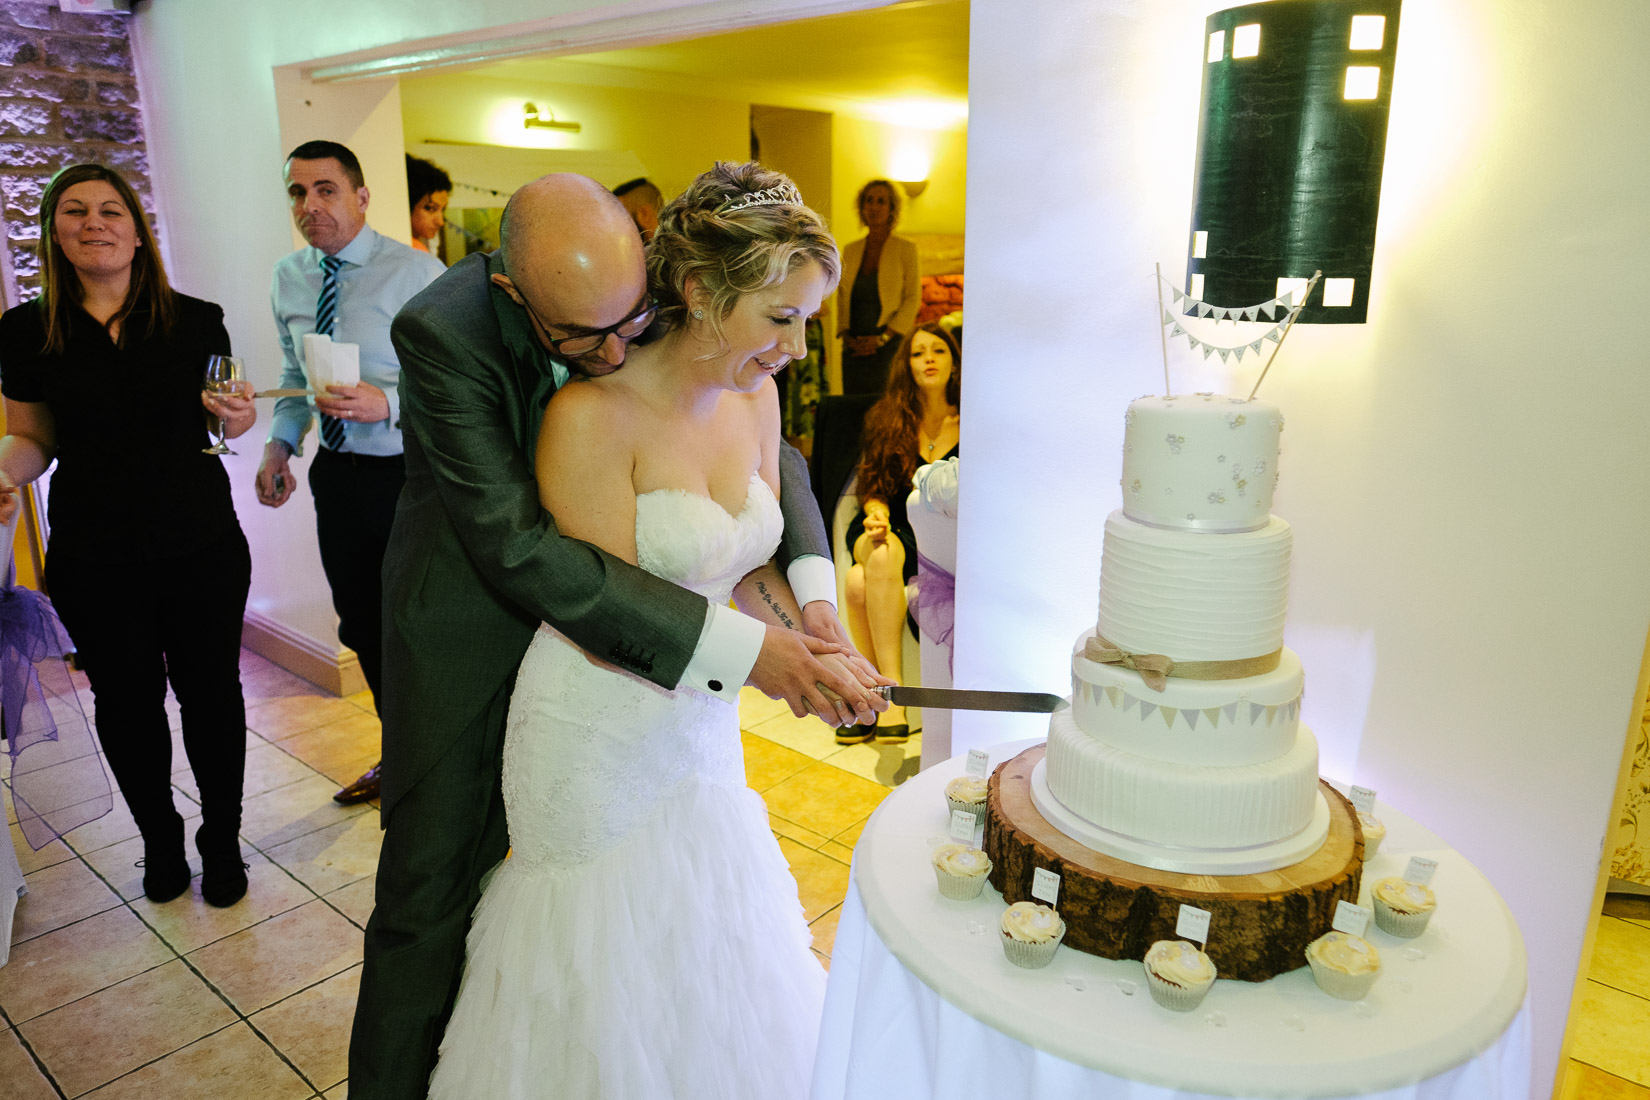  The wedding of Zoe and Dan Martindale, at the Tally Ho Hotel, Bicester 